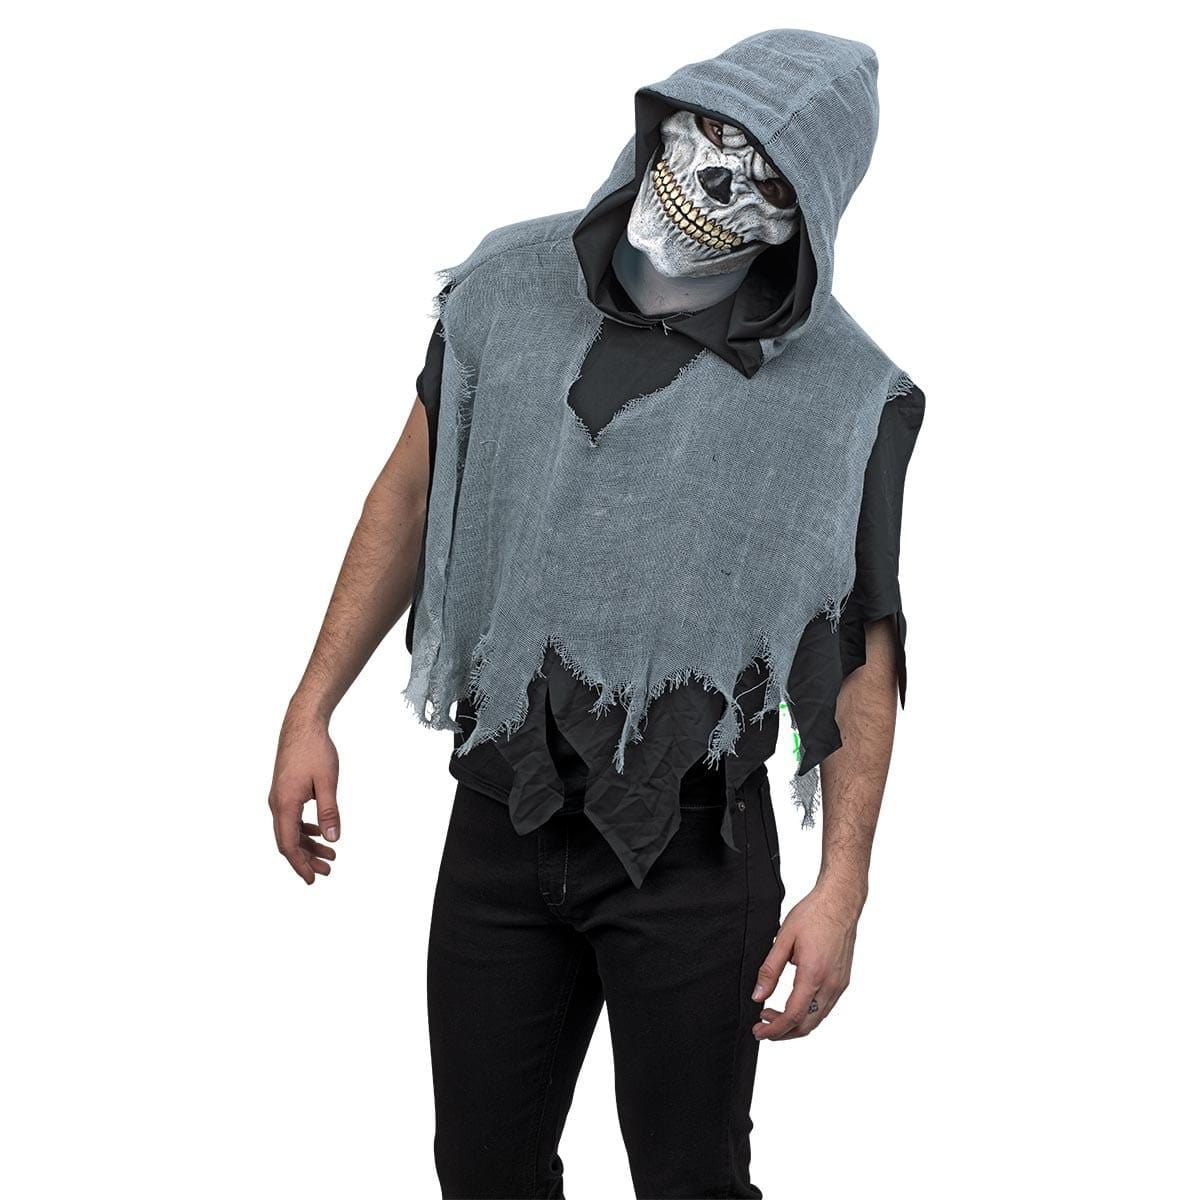 Buy Costume Accessories Grim Reaper Kit sold at Party Expert